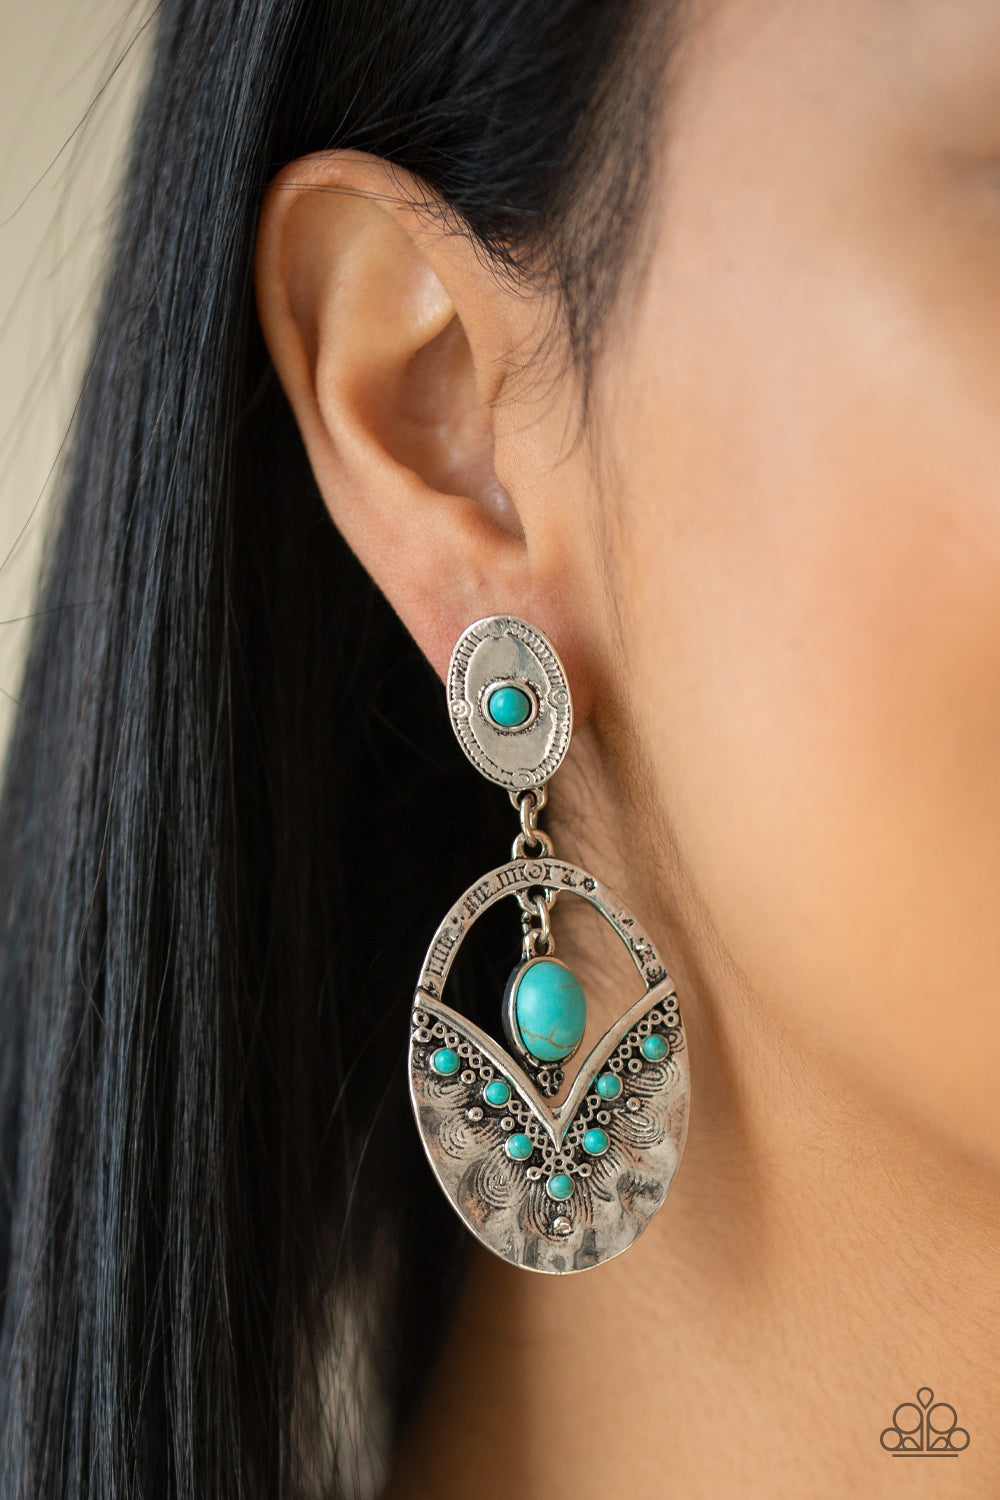 Terra Tribute Blue Earring - Paparazzi Accessories  Rippling with hammered silver textures, a turquoise stone dotted frame swings from the bottom of an ornate oval frame dotted with a matching turquoise stone. A smooth turquoise stone swings from the top of the ornate frame, creating an earthy lure. Earring attaches to a standard post fitting.   All Paparazzi Accessories are lead free and nickel free!  Sold as one pair of post earrings.